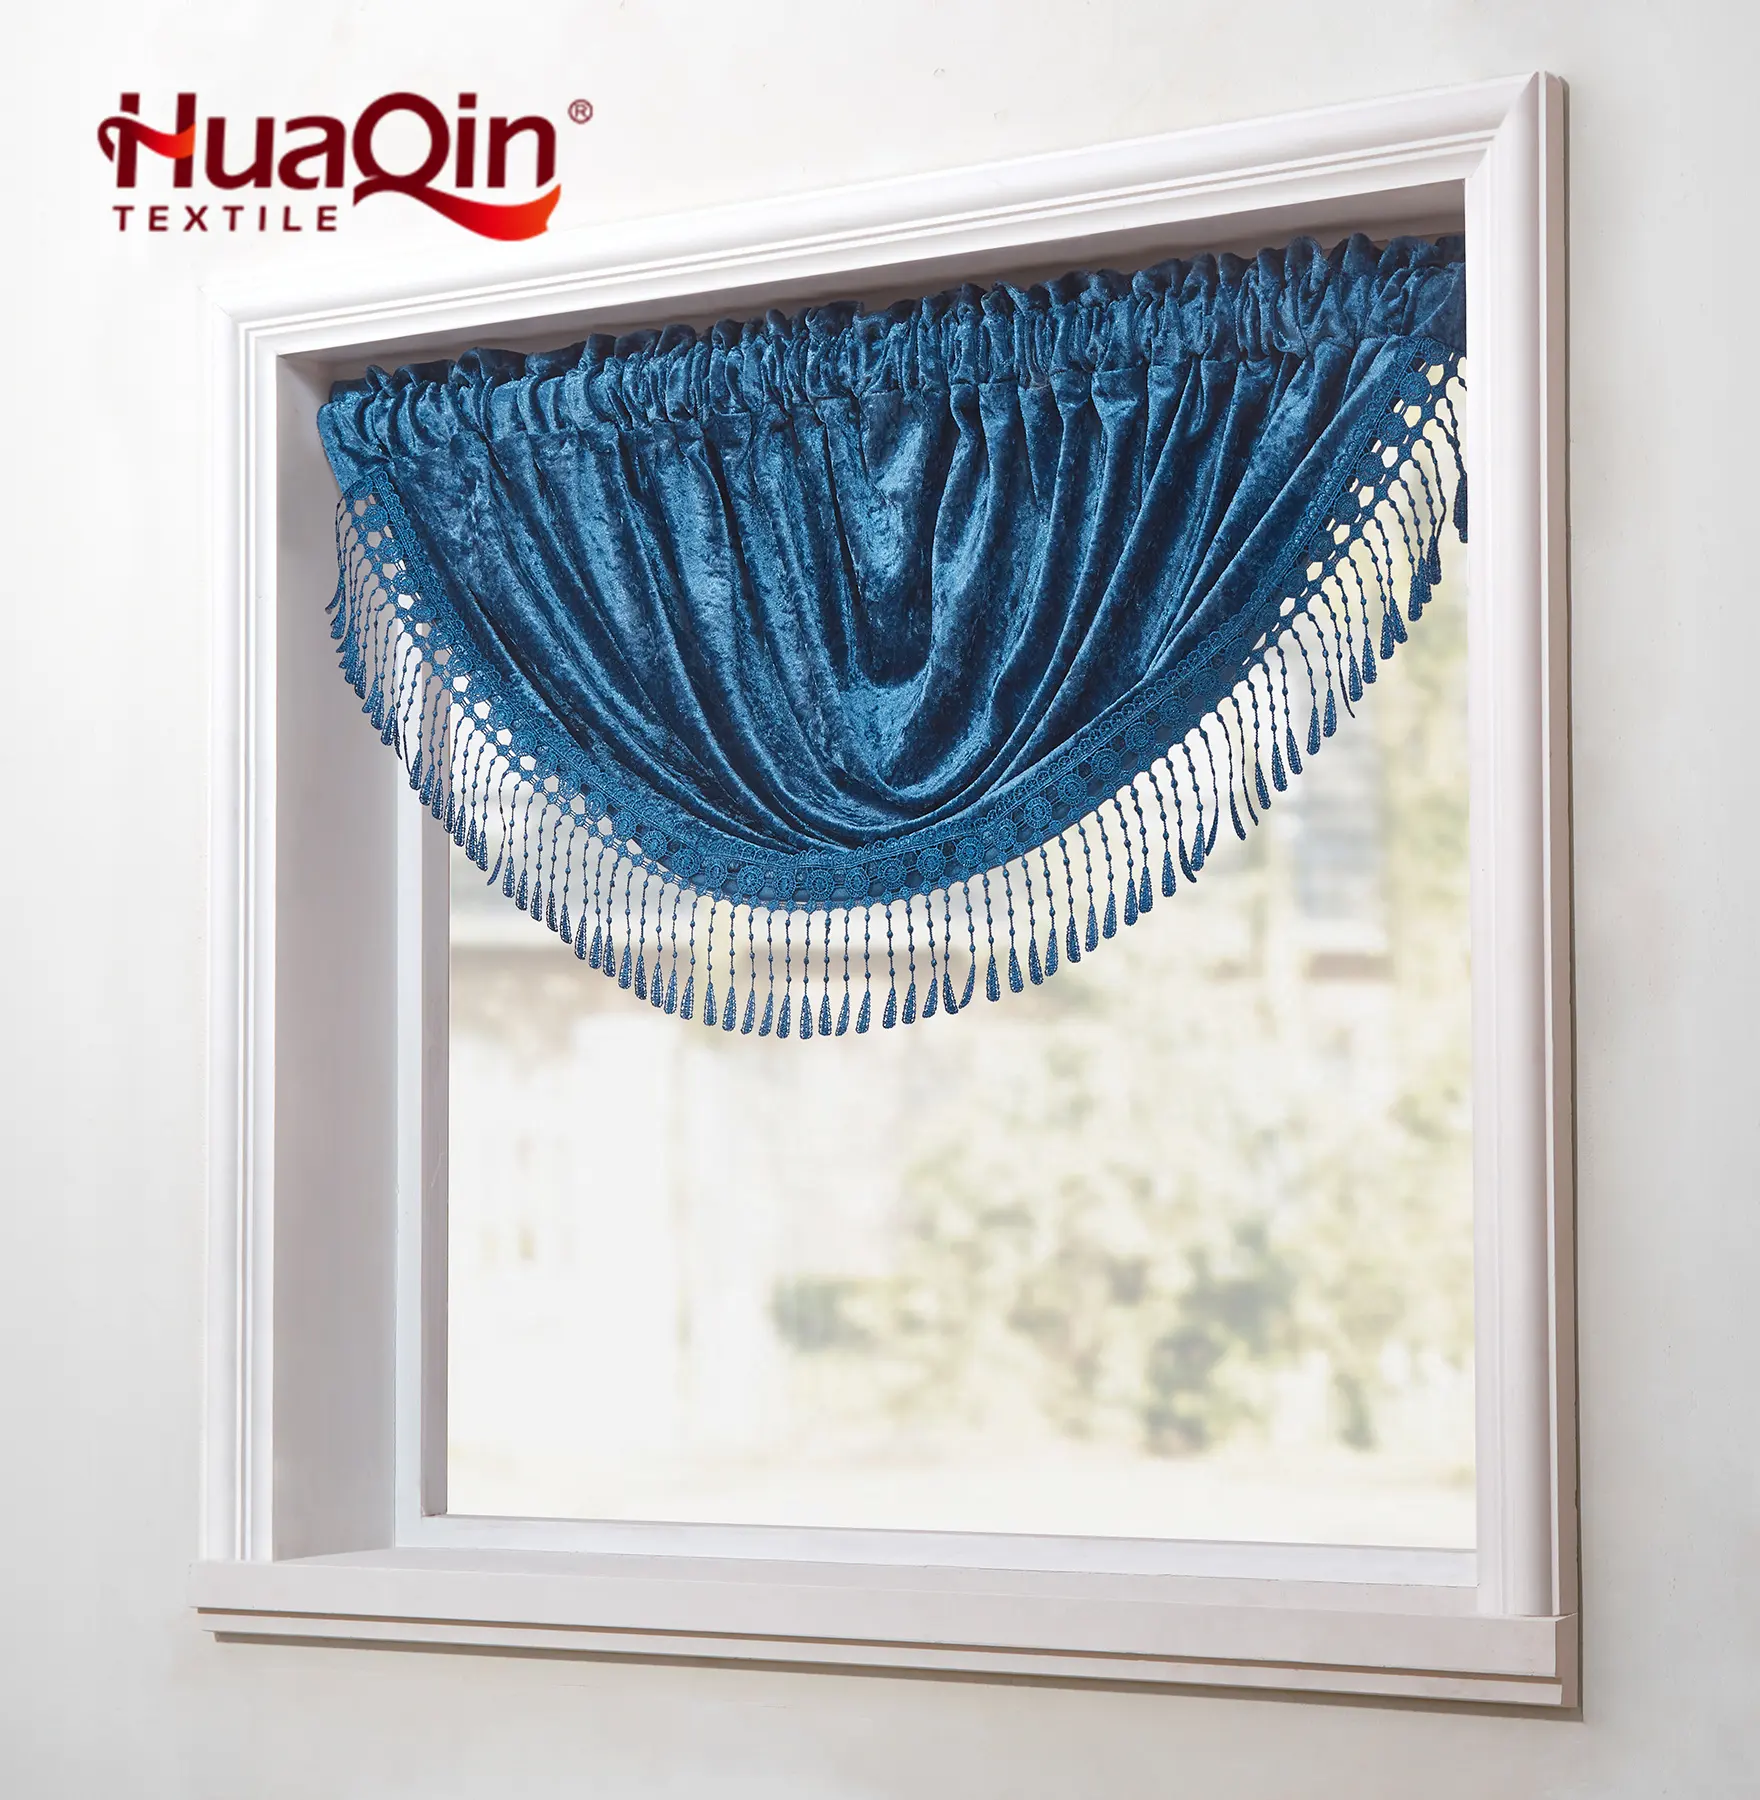 Hot luxury Curtains Valance Curtains for Living Room Bedroom Marriage Room Bay Window